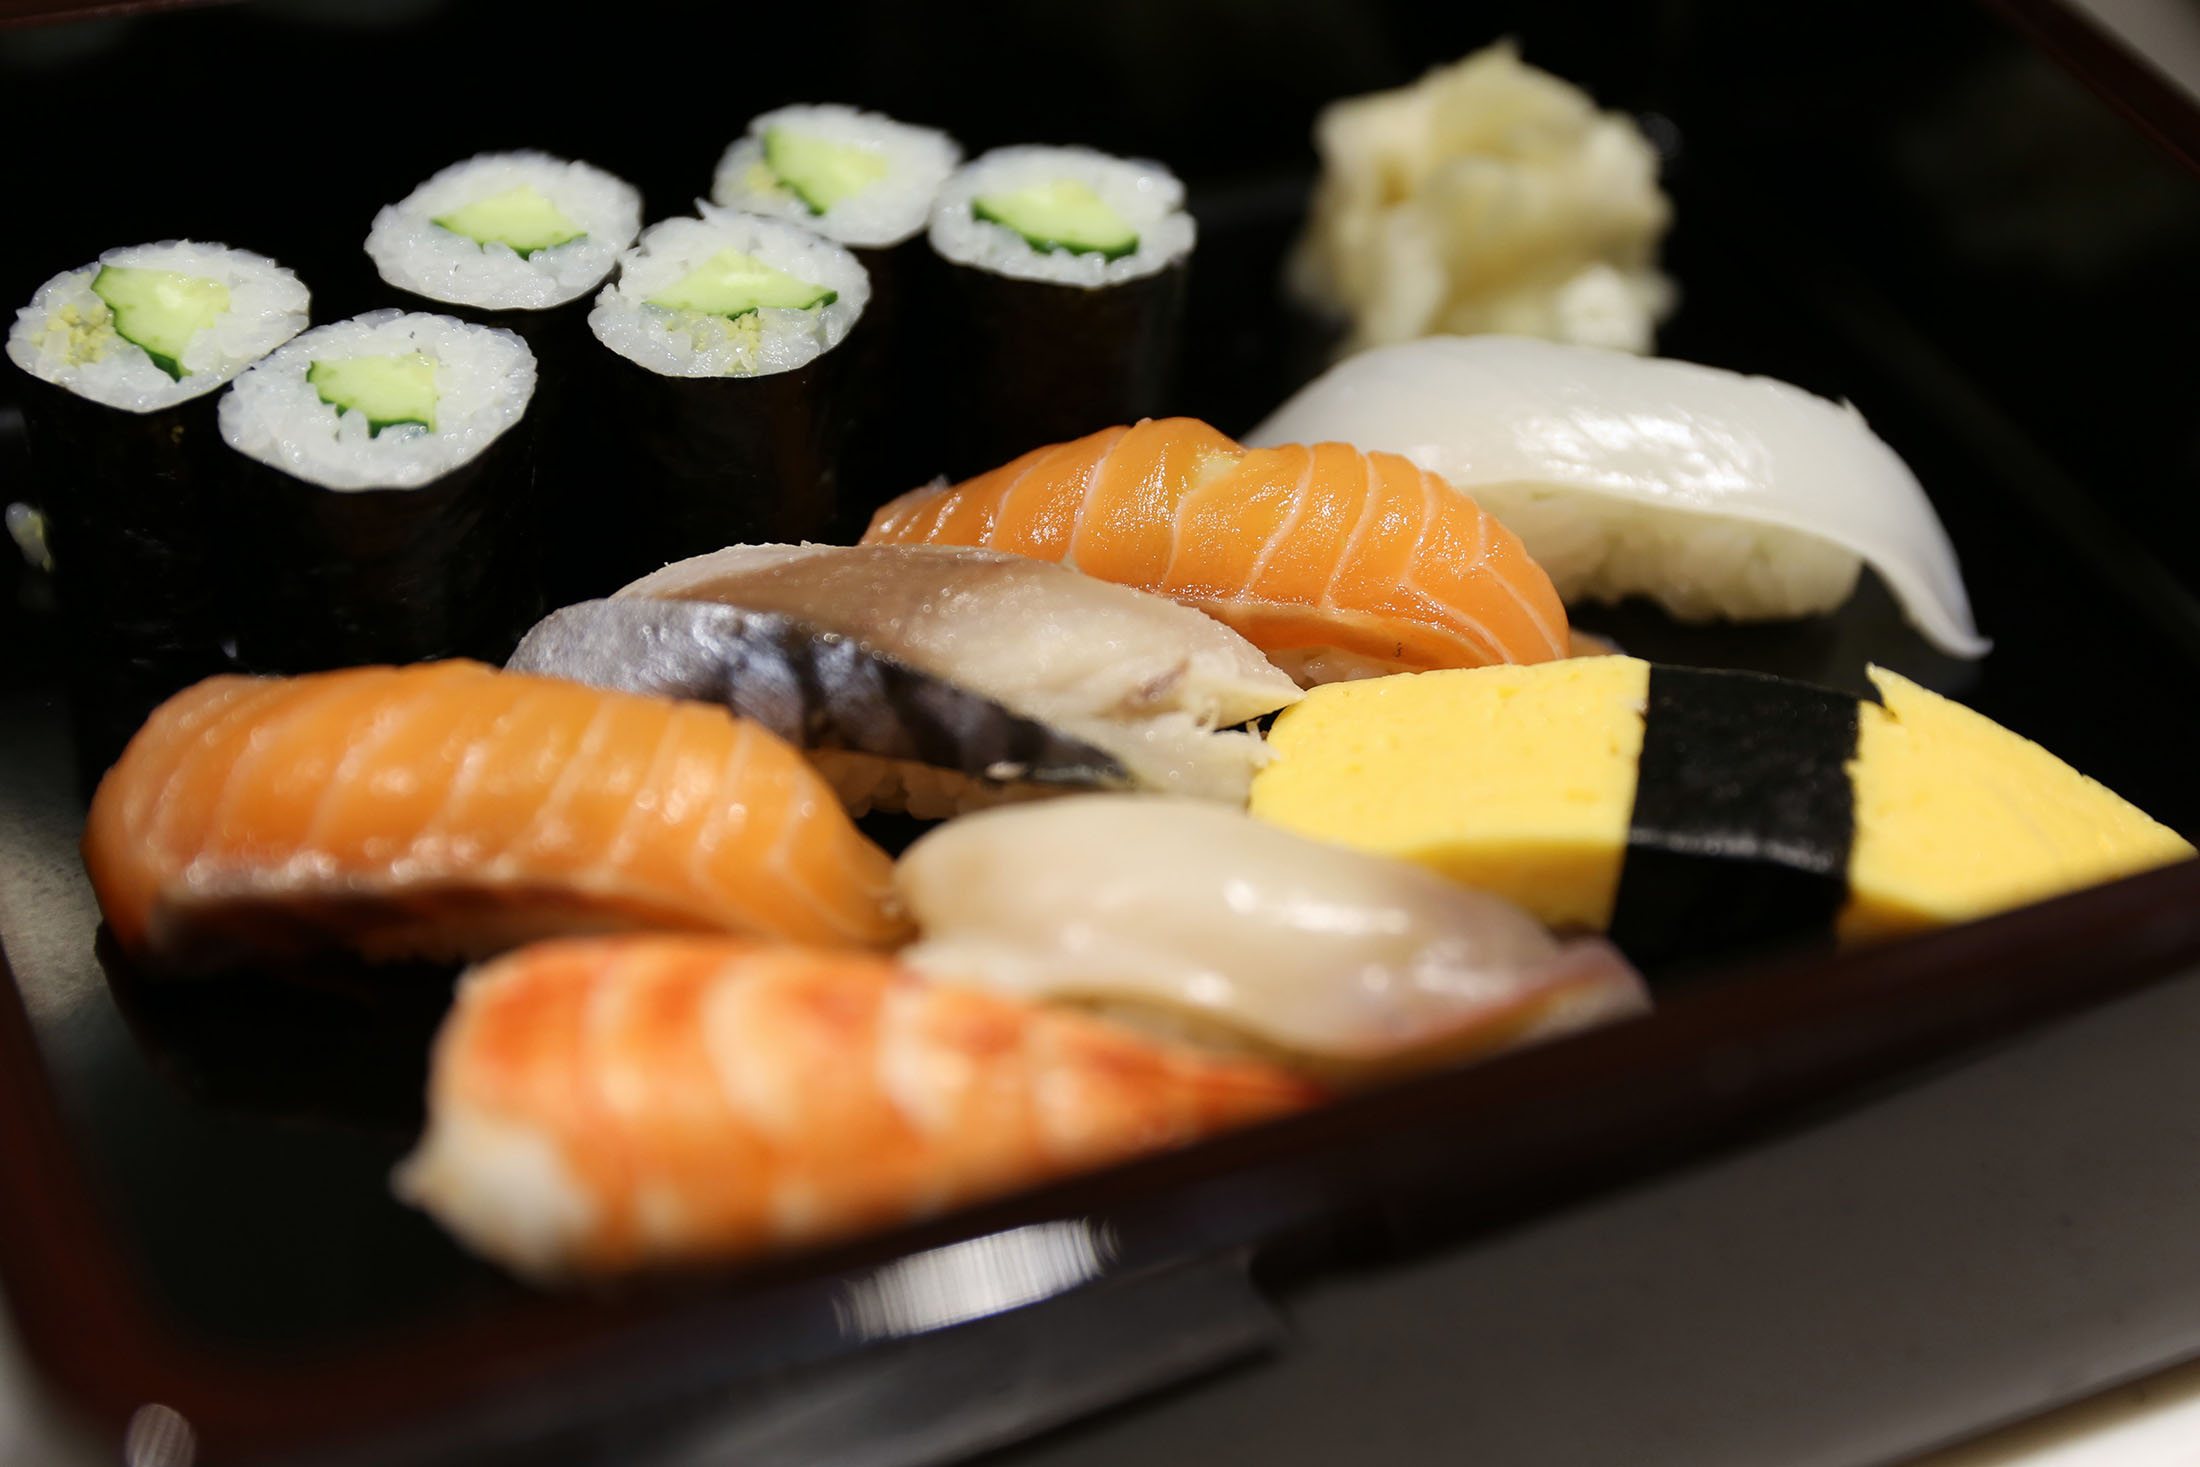 A dish of traditional Edomae sushi sits on display at the Global Sushi Challenge competition 2015 in Tokyo, Japan, on Sept. 2, 2015.
